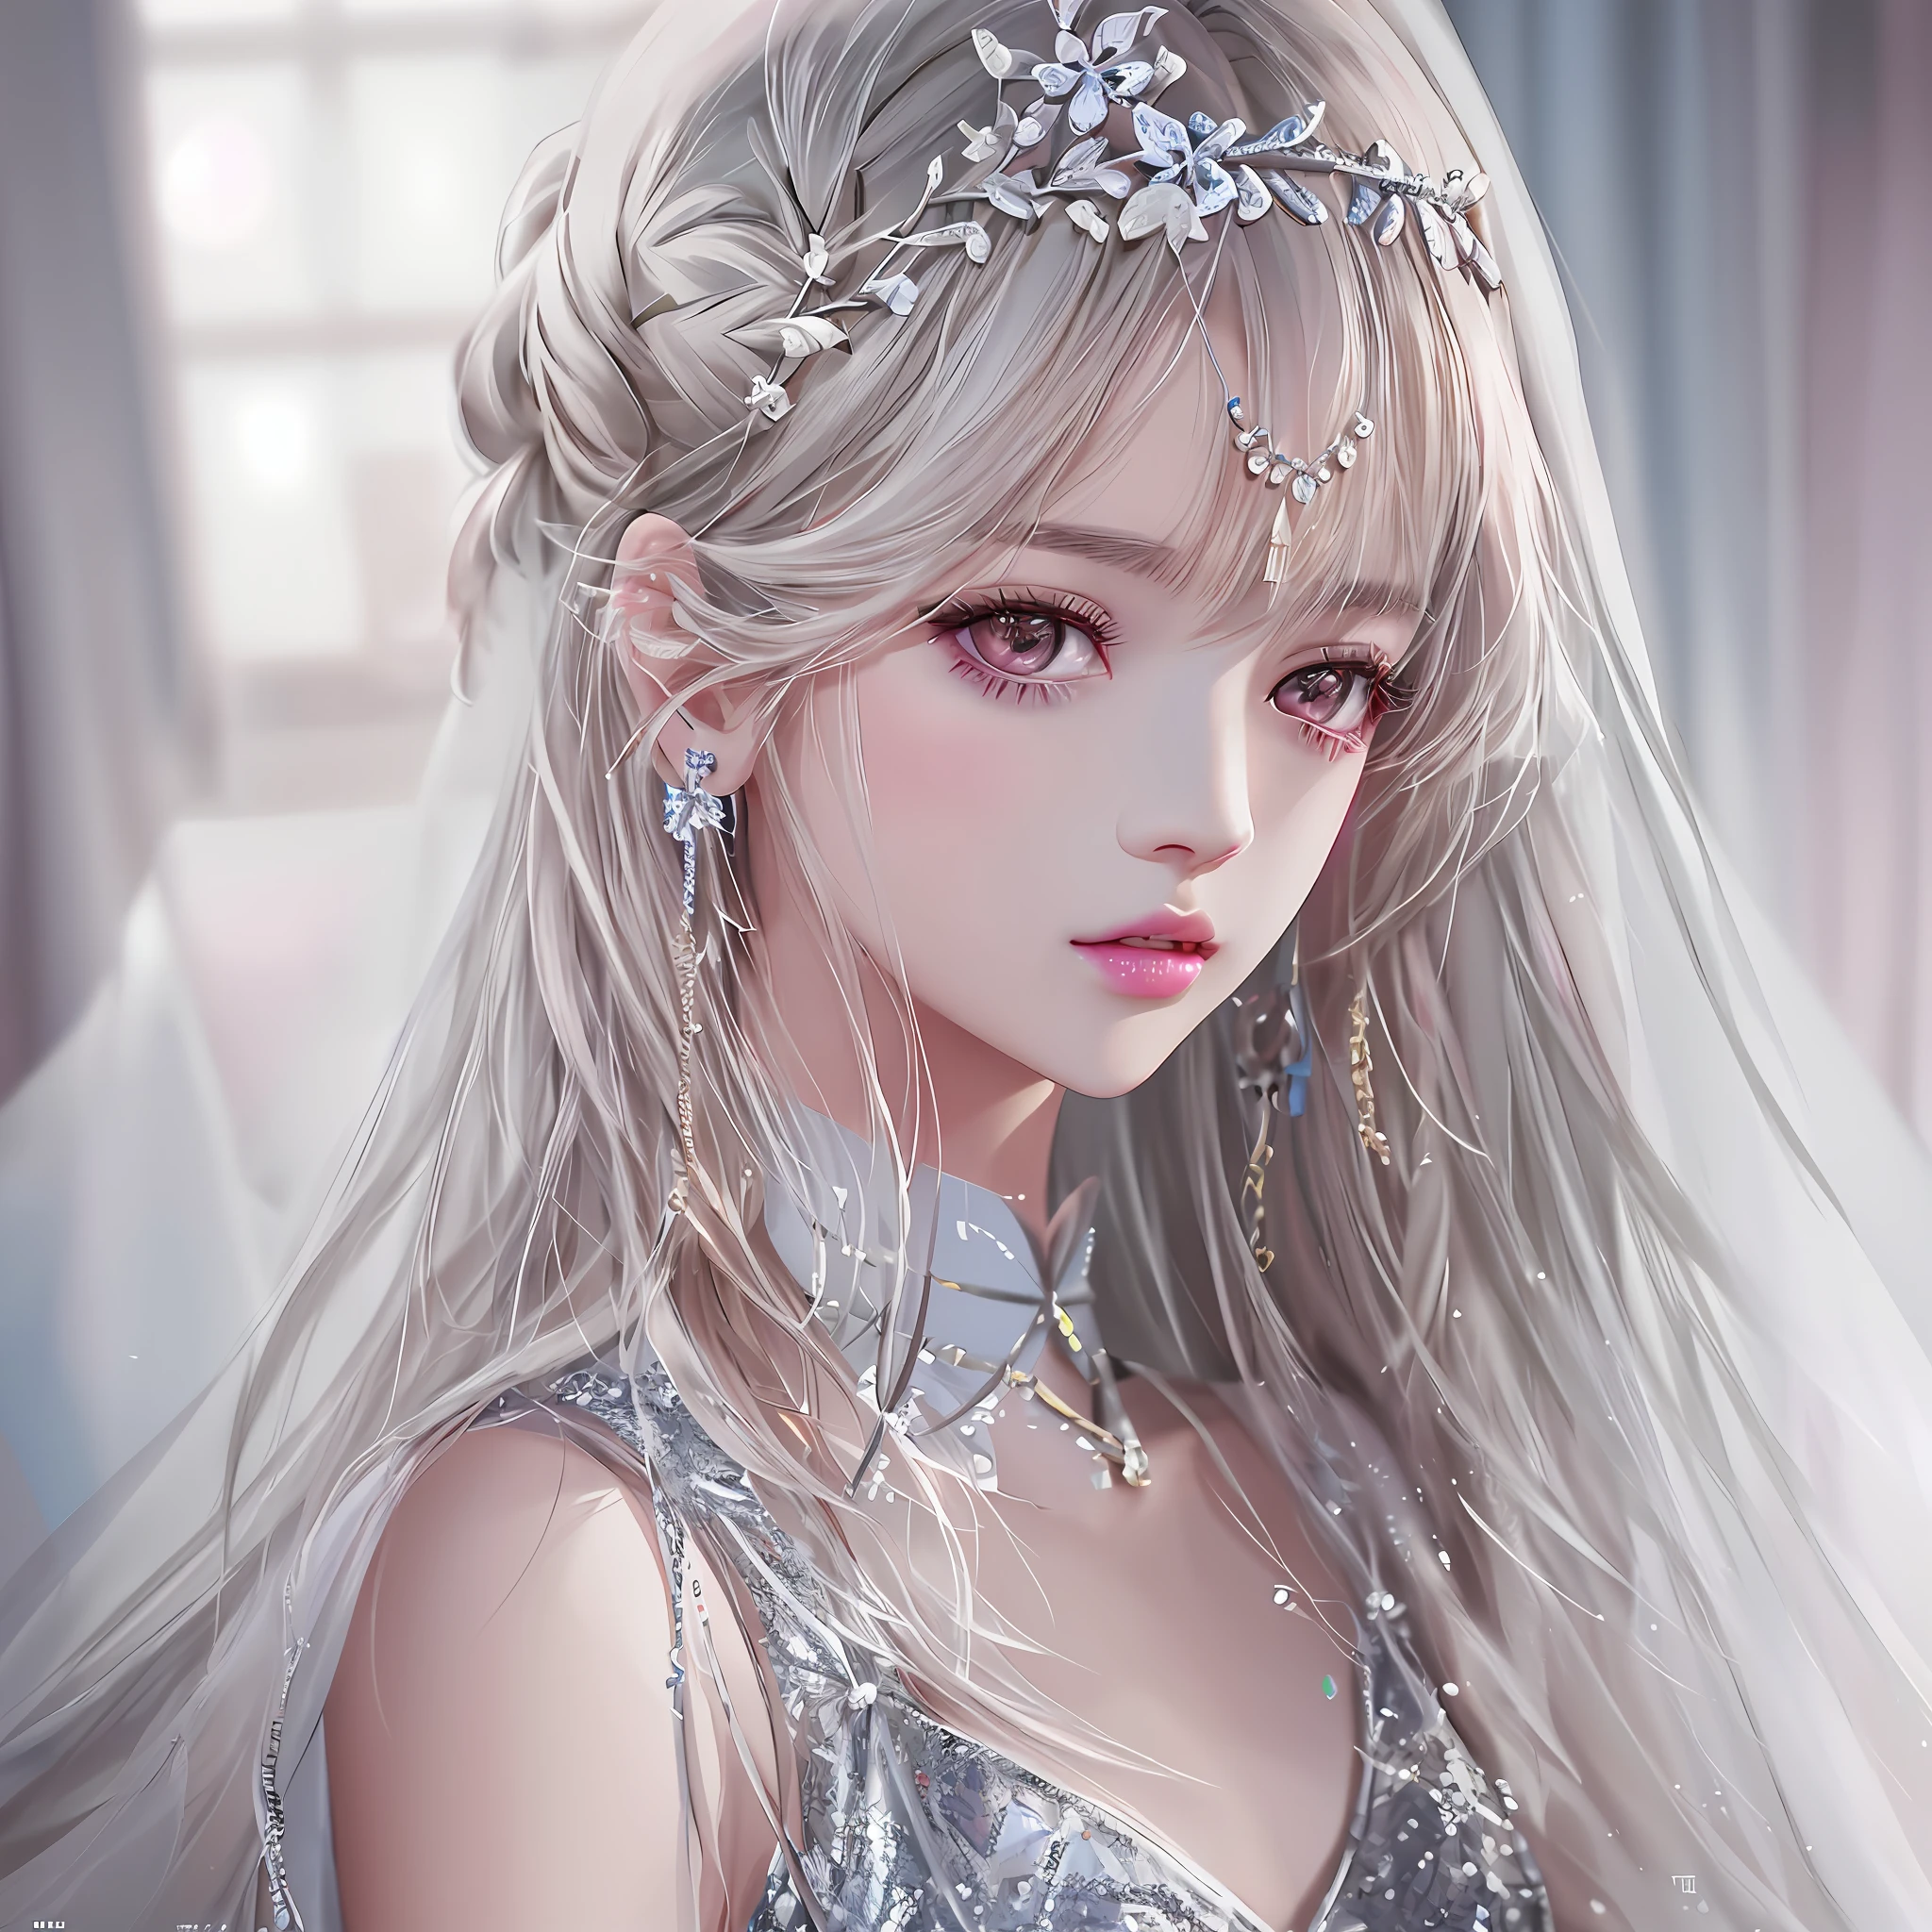 Draw a woman with long hair and a silver dress, lalisa manobal, portrait of jossi of blackpink, portrait of female korean idol, portrait of kpop idol, lalisa manoban of blackpink, portrait jisoo blackpink, inspired by Yanjun Cheng, A beautiful illustration, [ 4 K digital art ]!!